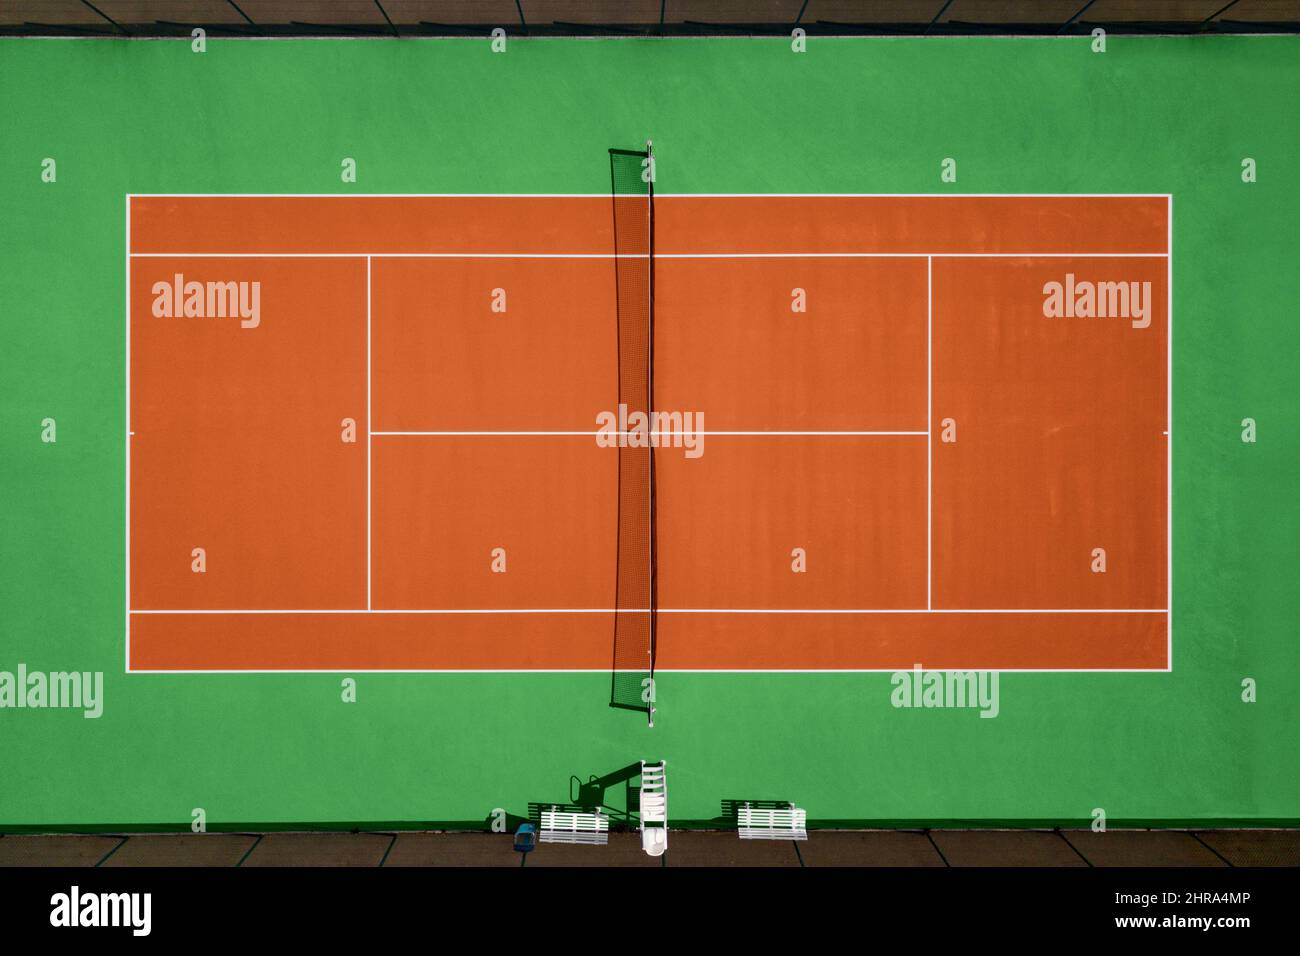 Aerial view of orange and green tennis hard court. Stock Photo